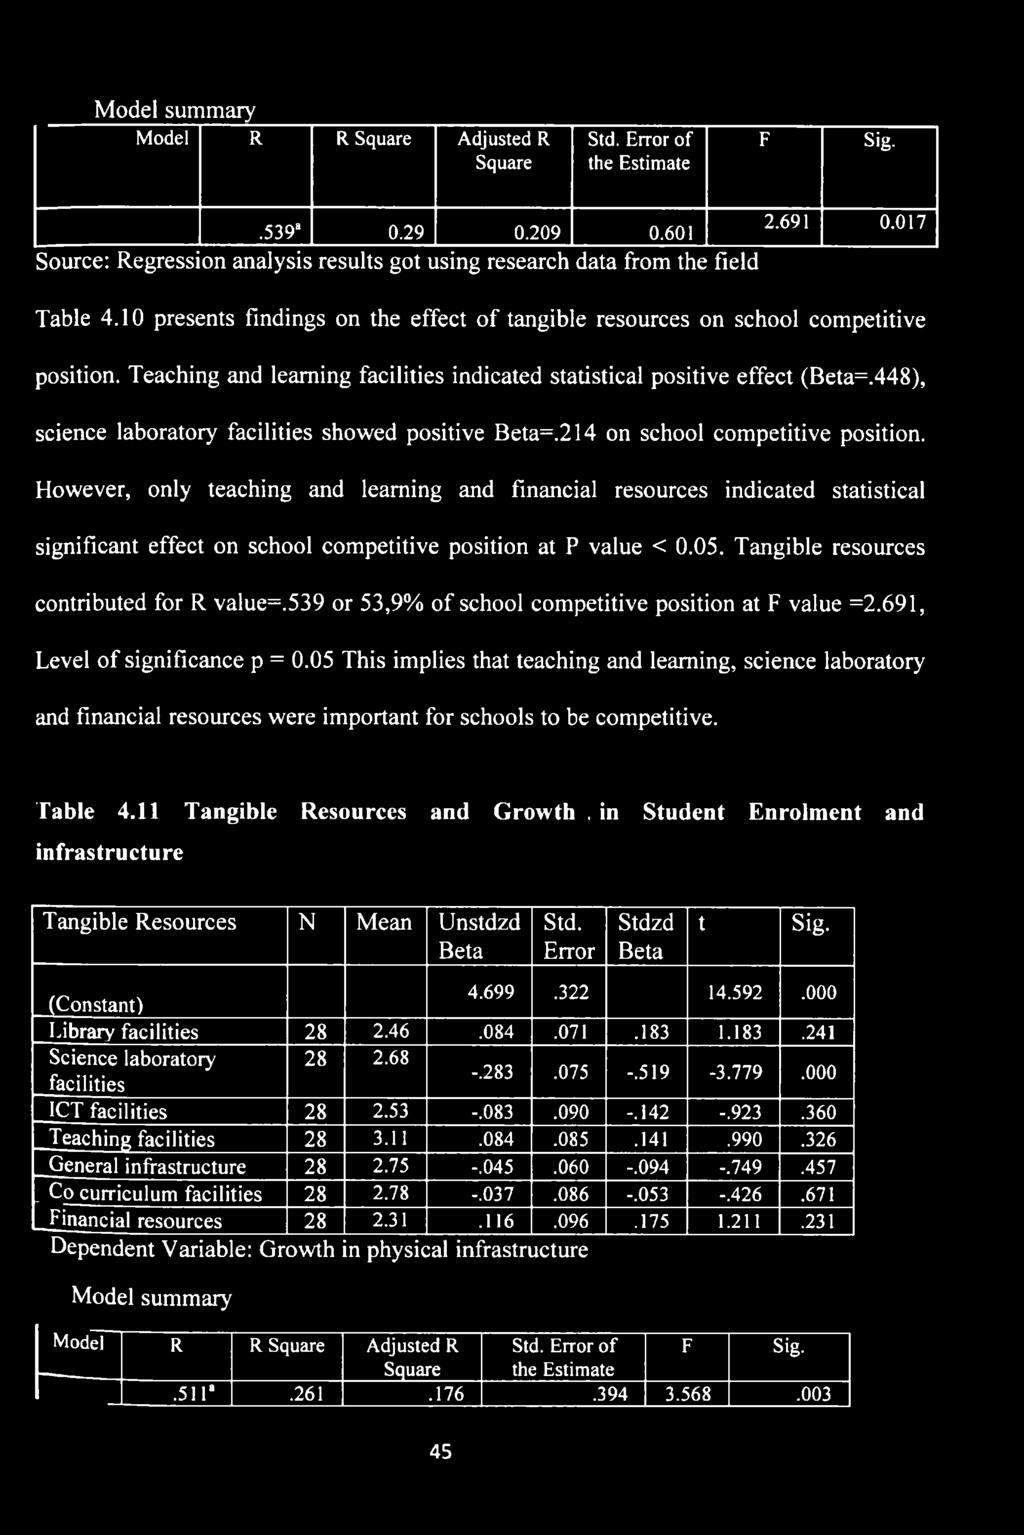 448), science laboratory facilities showed positive Beta=.214 on school competitive position.